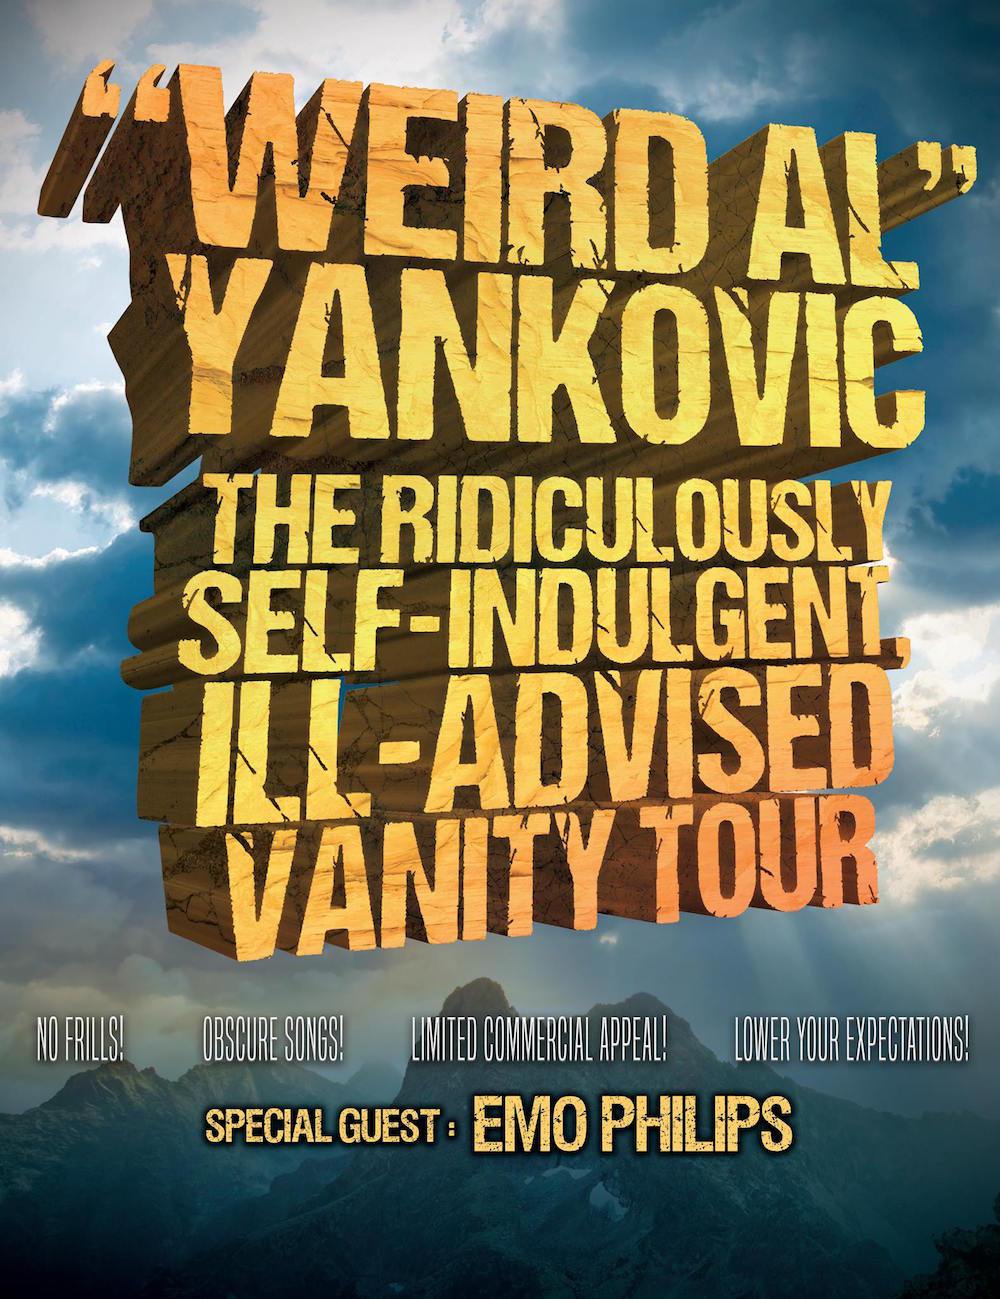 22382377 10155536575906005 5239119970592500997 o Weird Al Yankovic announces The Ridiculously Self Indulgent Ill Advised Vanity Tour